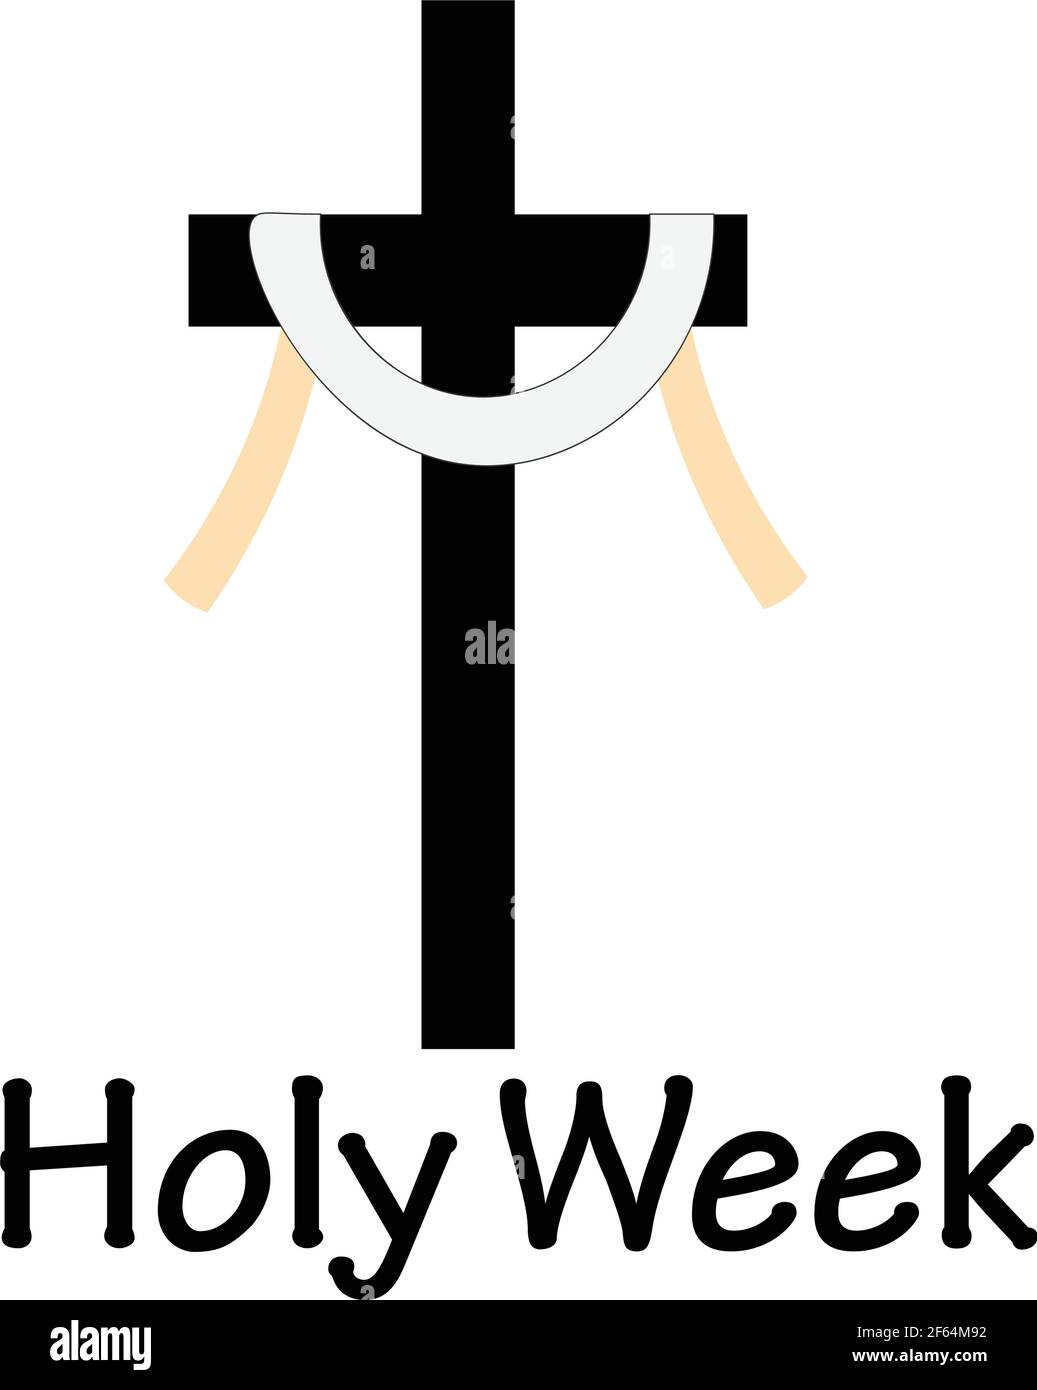 Holy Week before Easter, Lent Season, Good Friday crucifixion of ...